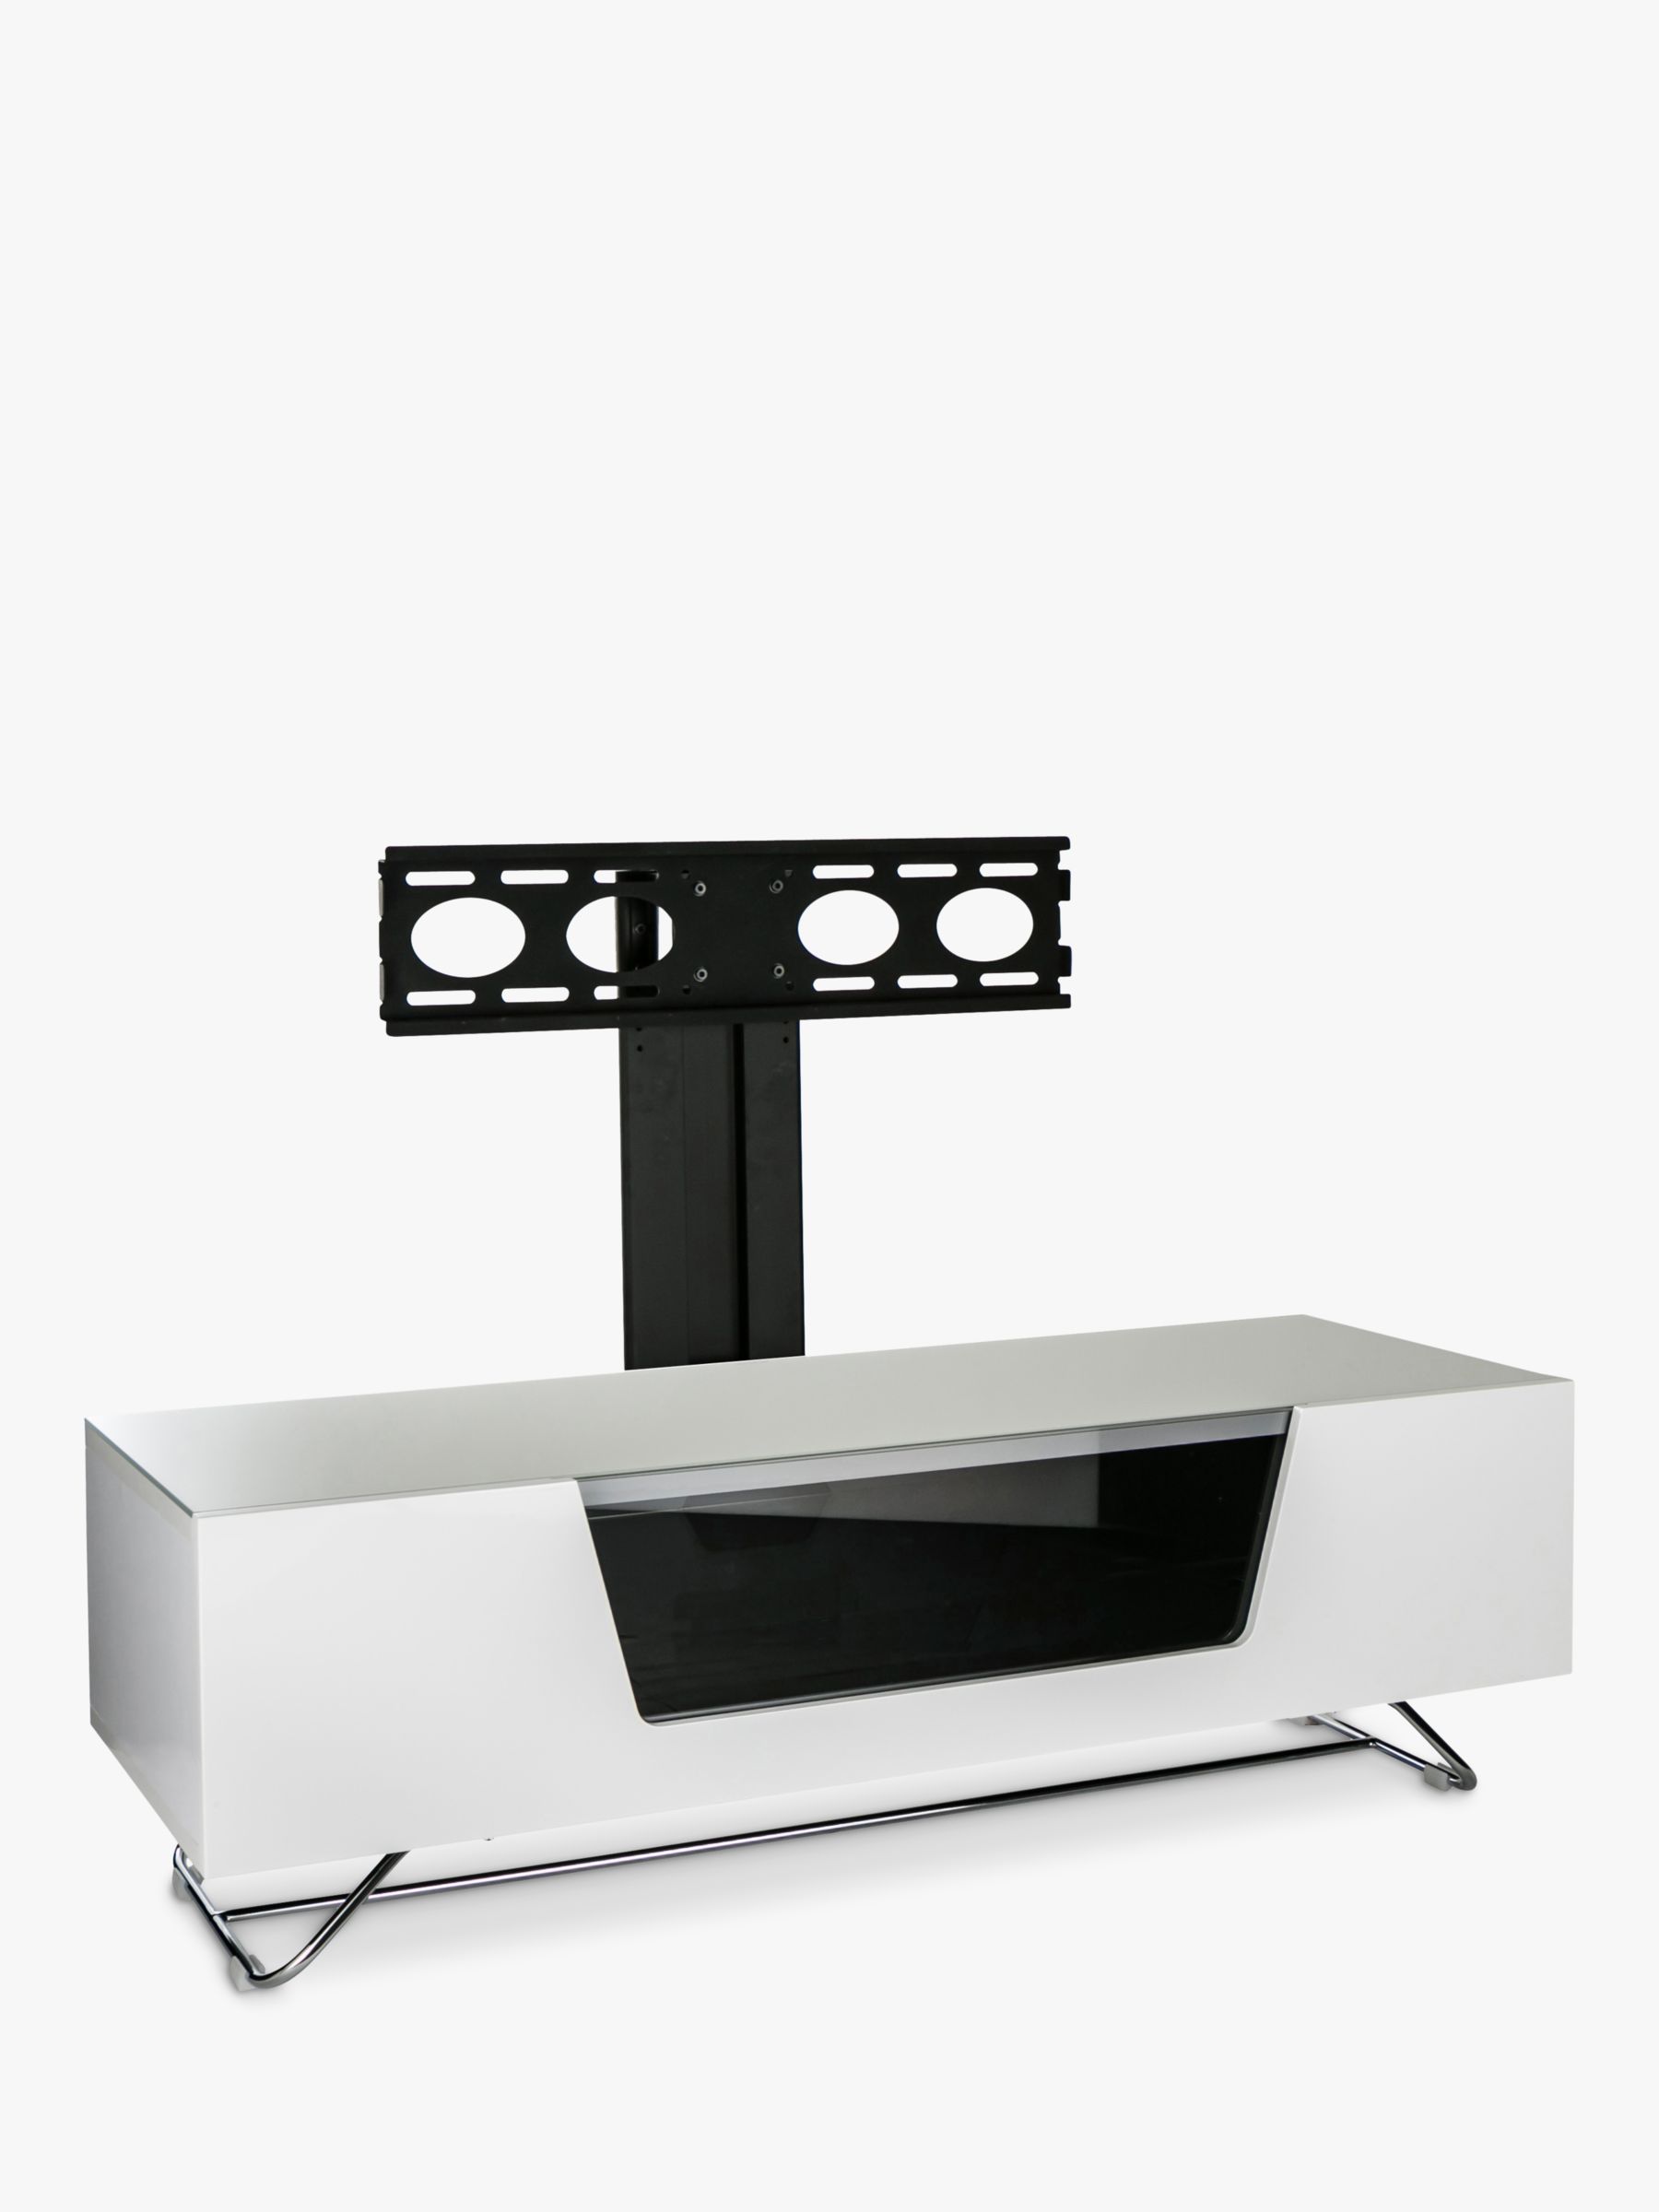 Photo of Alphason chromium 2 1200mm tv stand with bracket for tvs up to 50